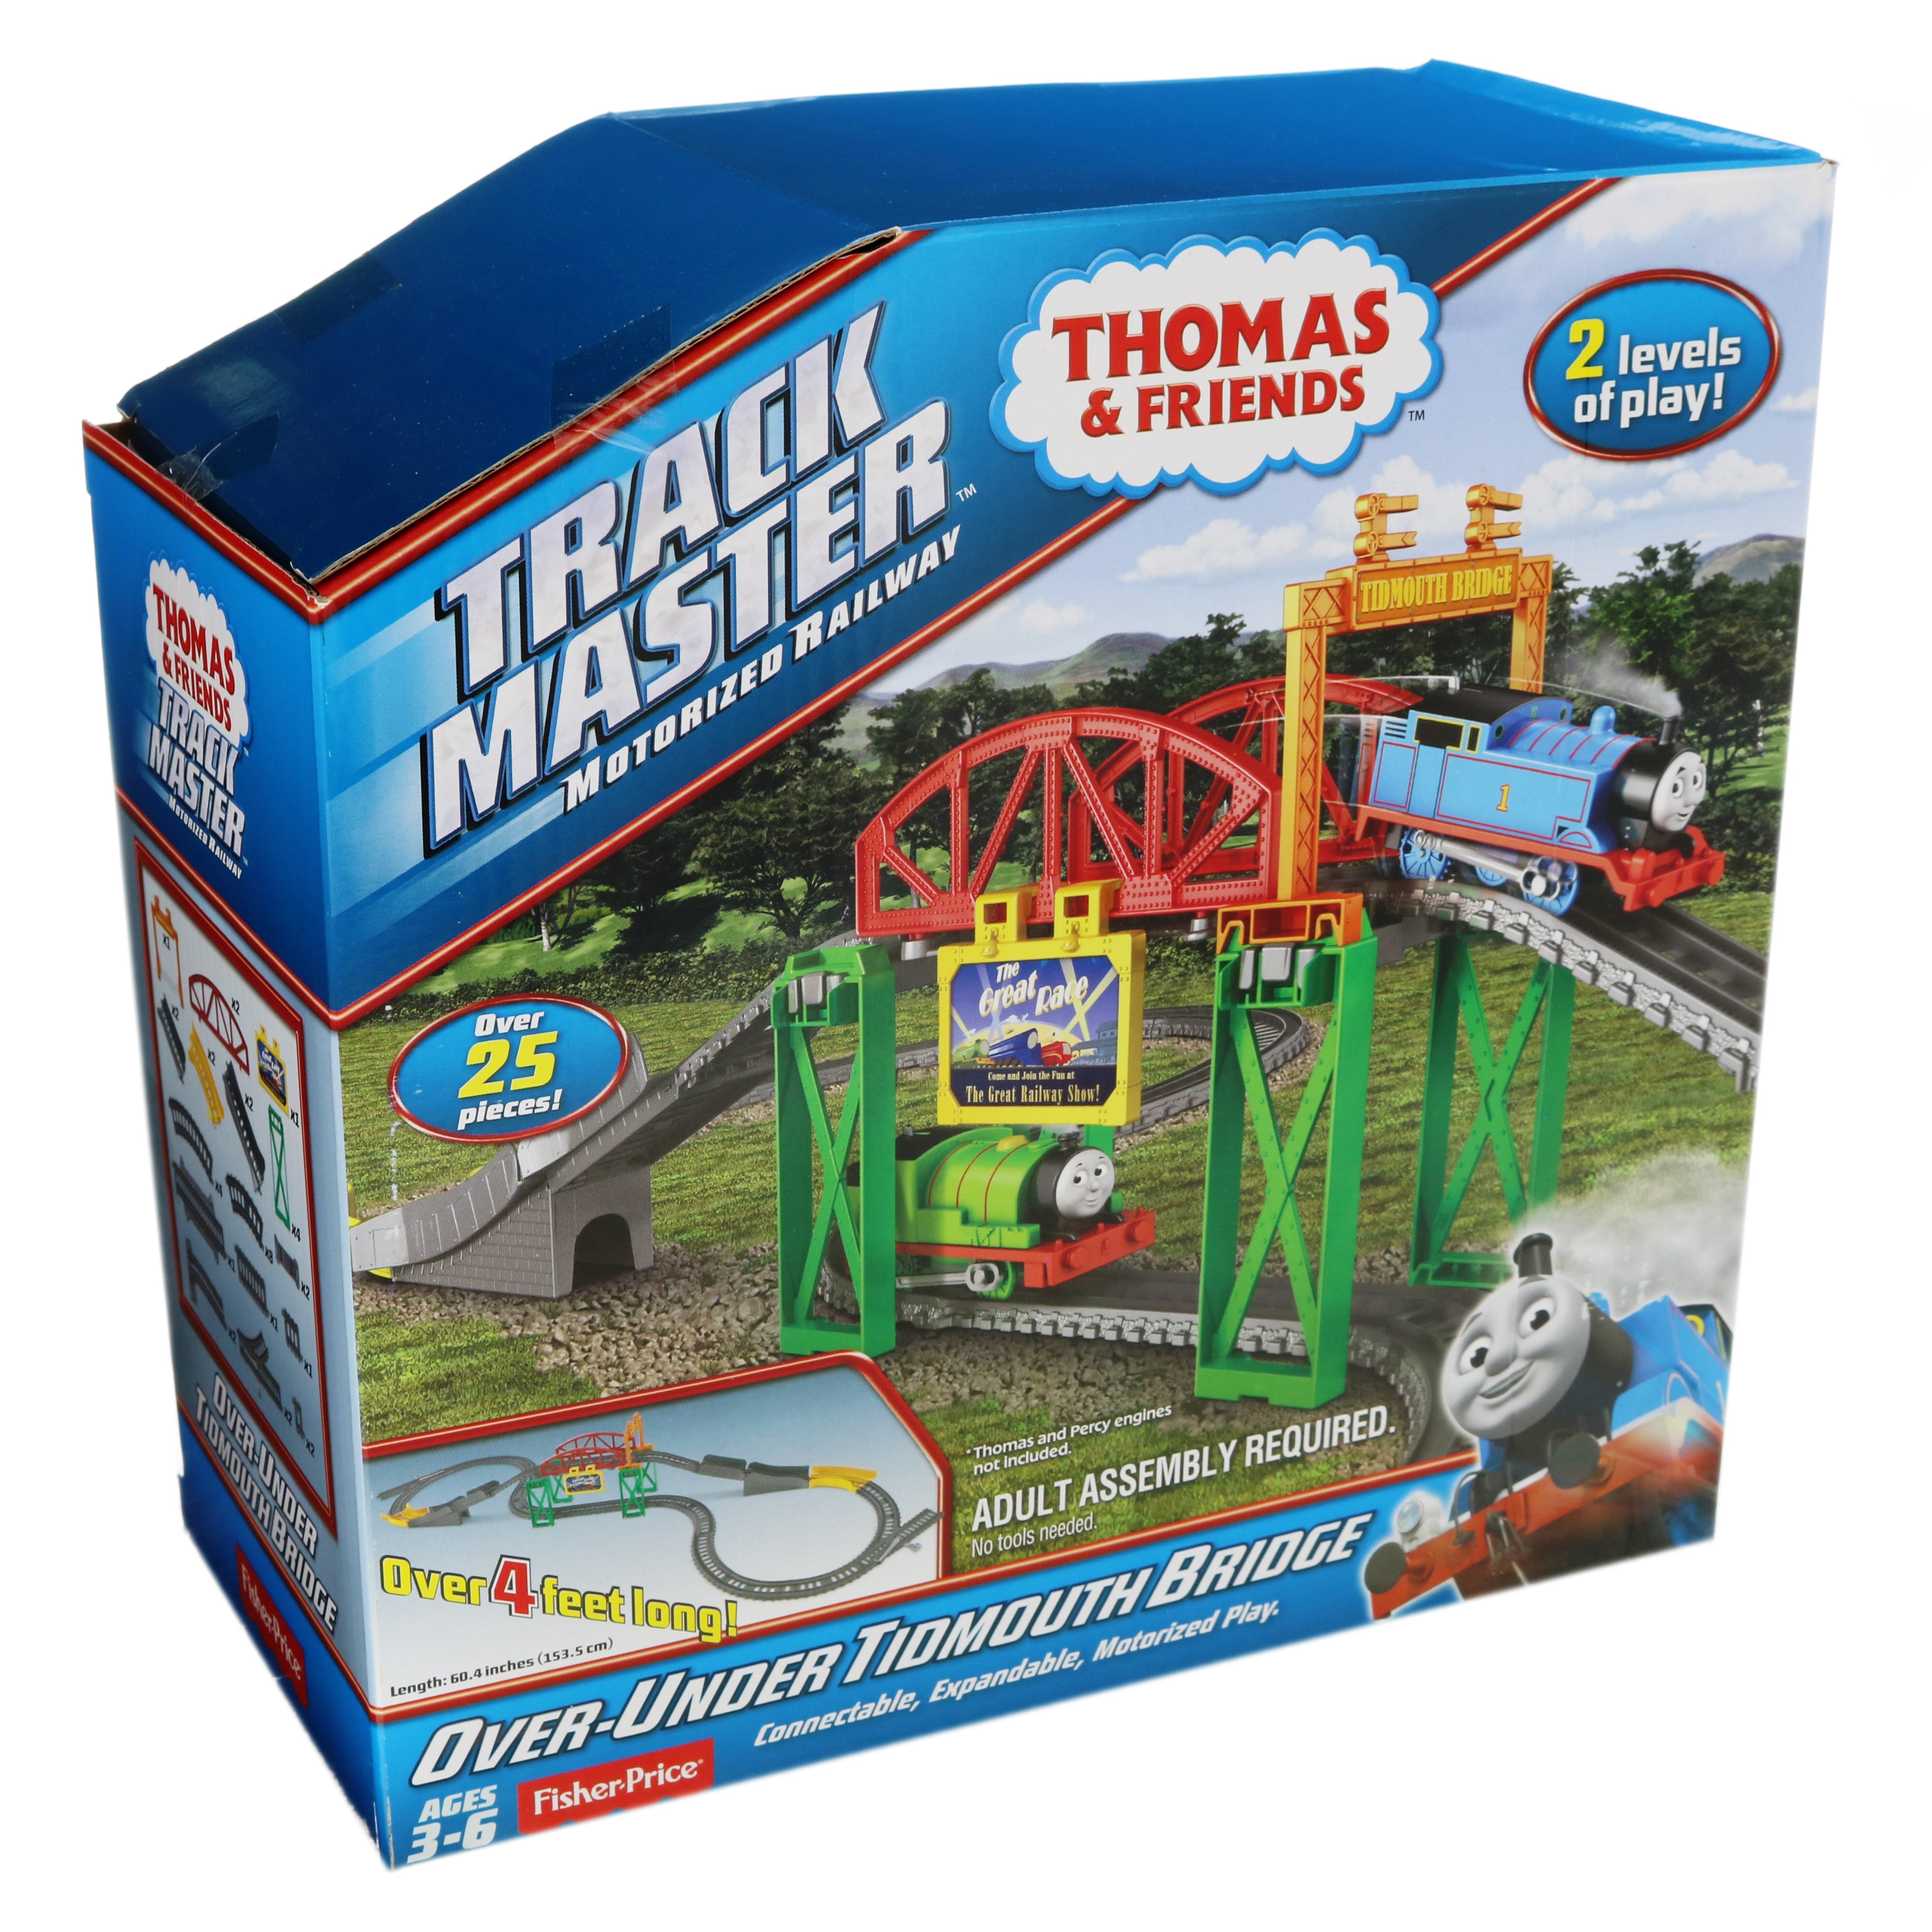 thomas and friends playsets